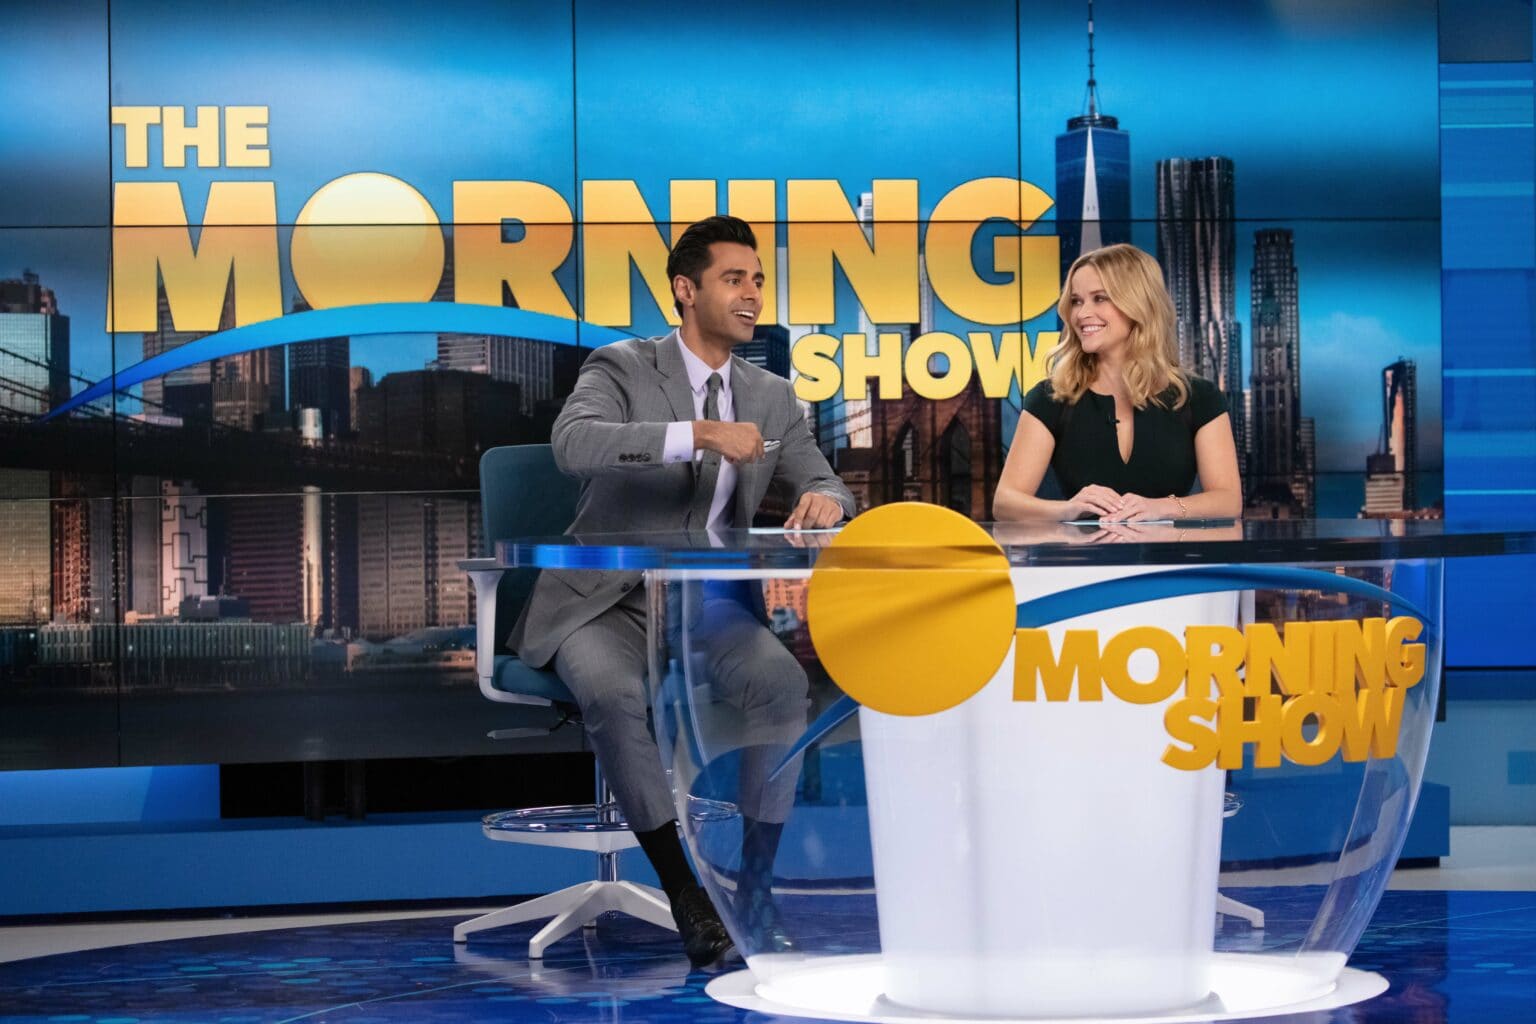 Hasan Minhaj and Reese Witherspoon returns to The Morning Show